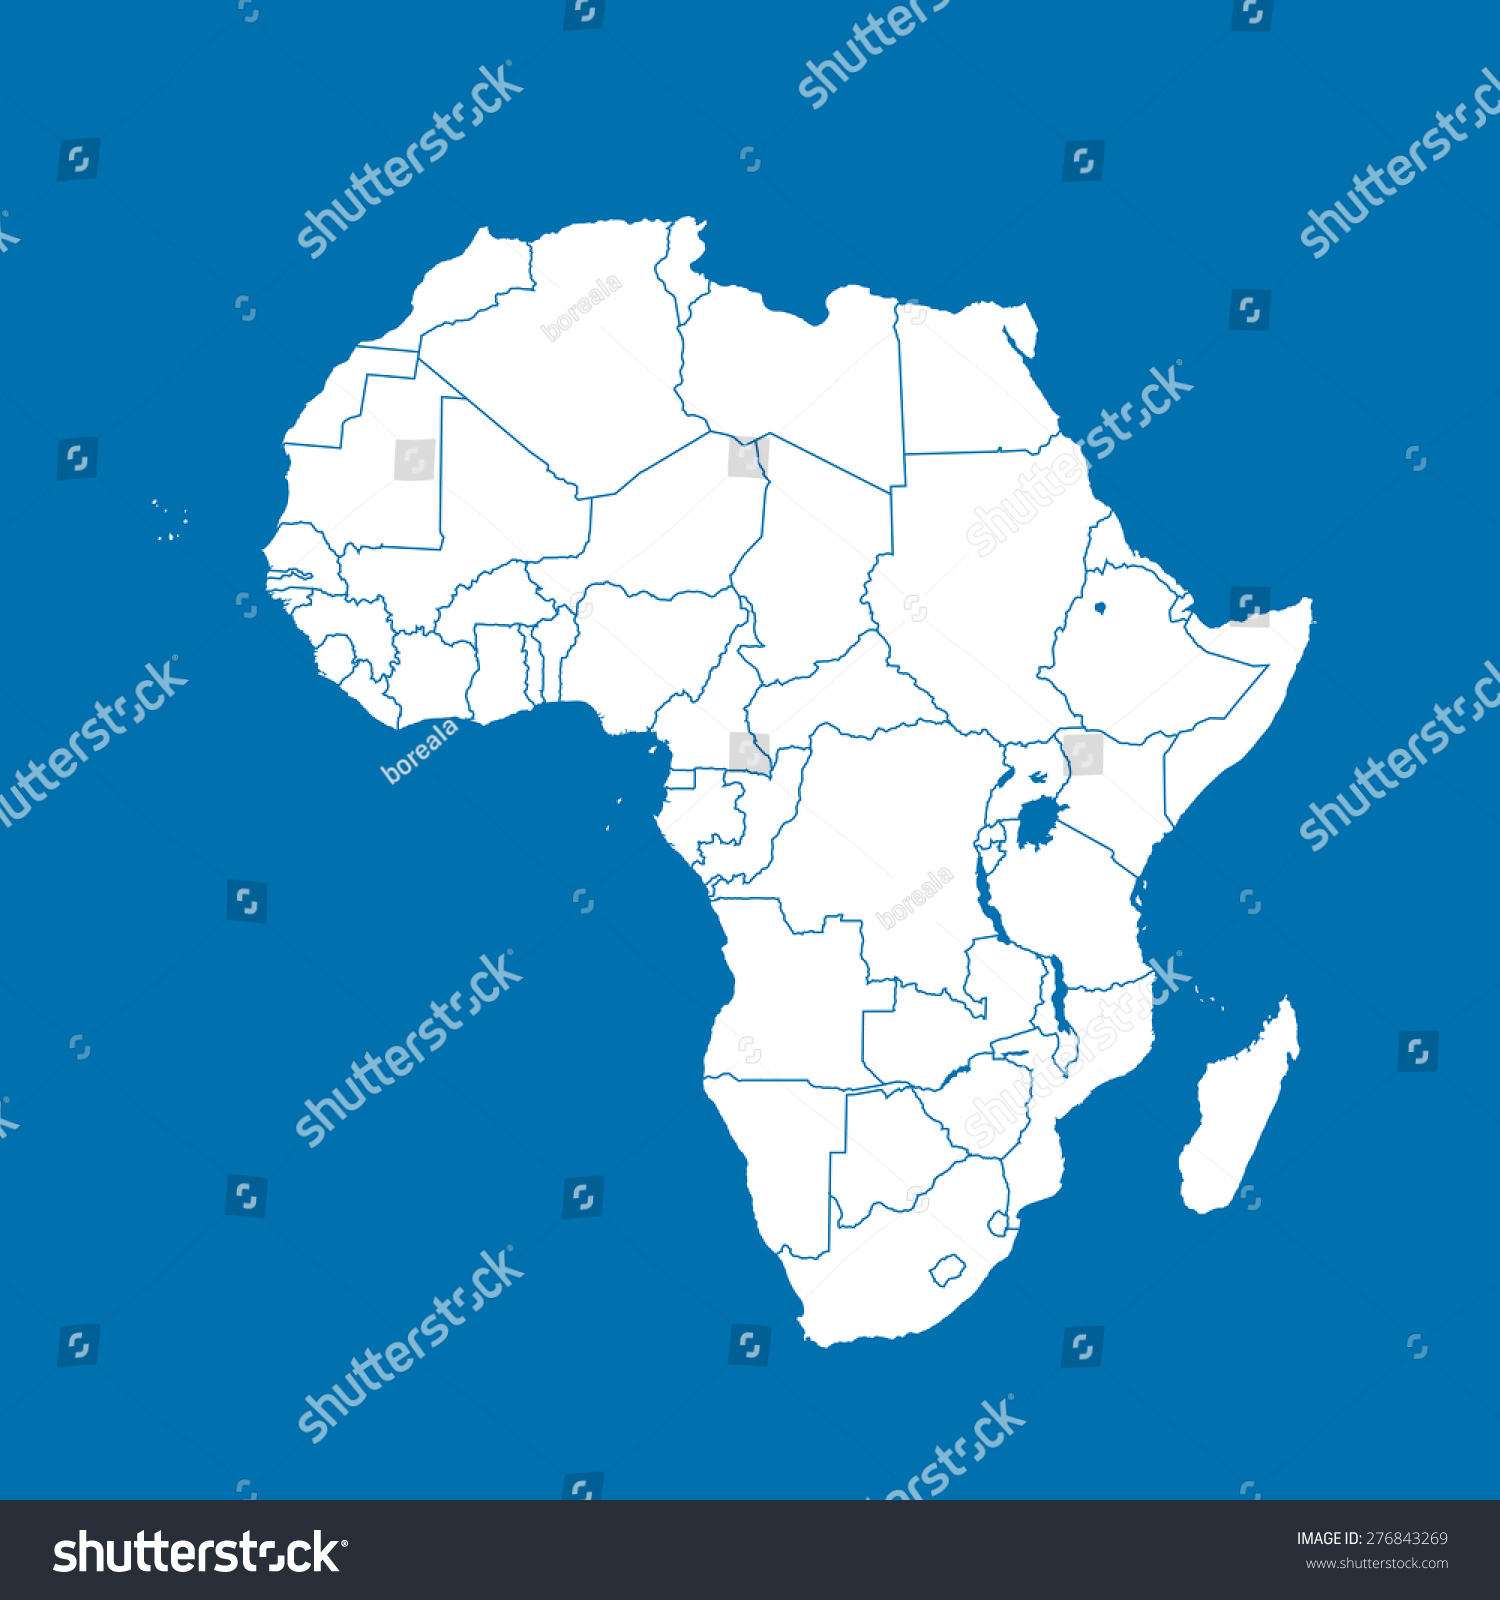 Map Of Africa Royalty Free Stock Vector 276843269 8101